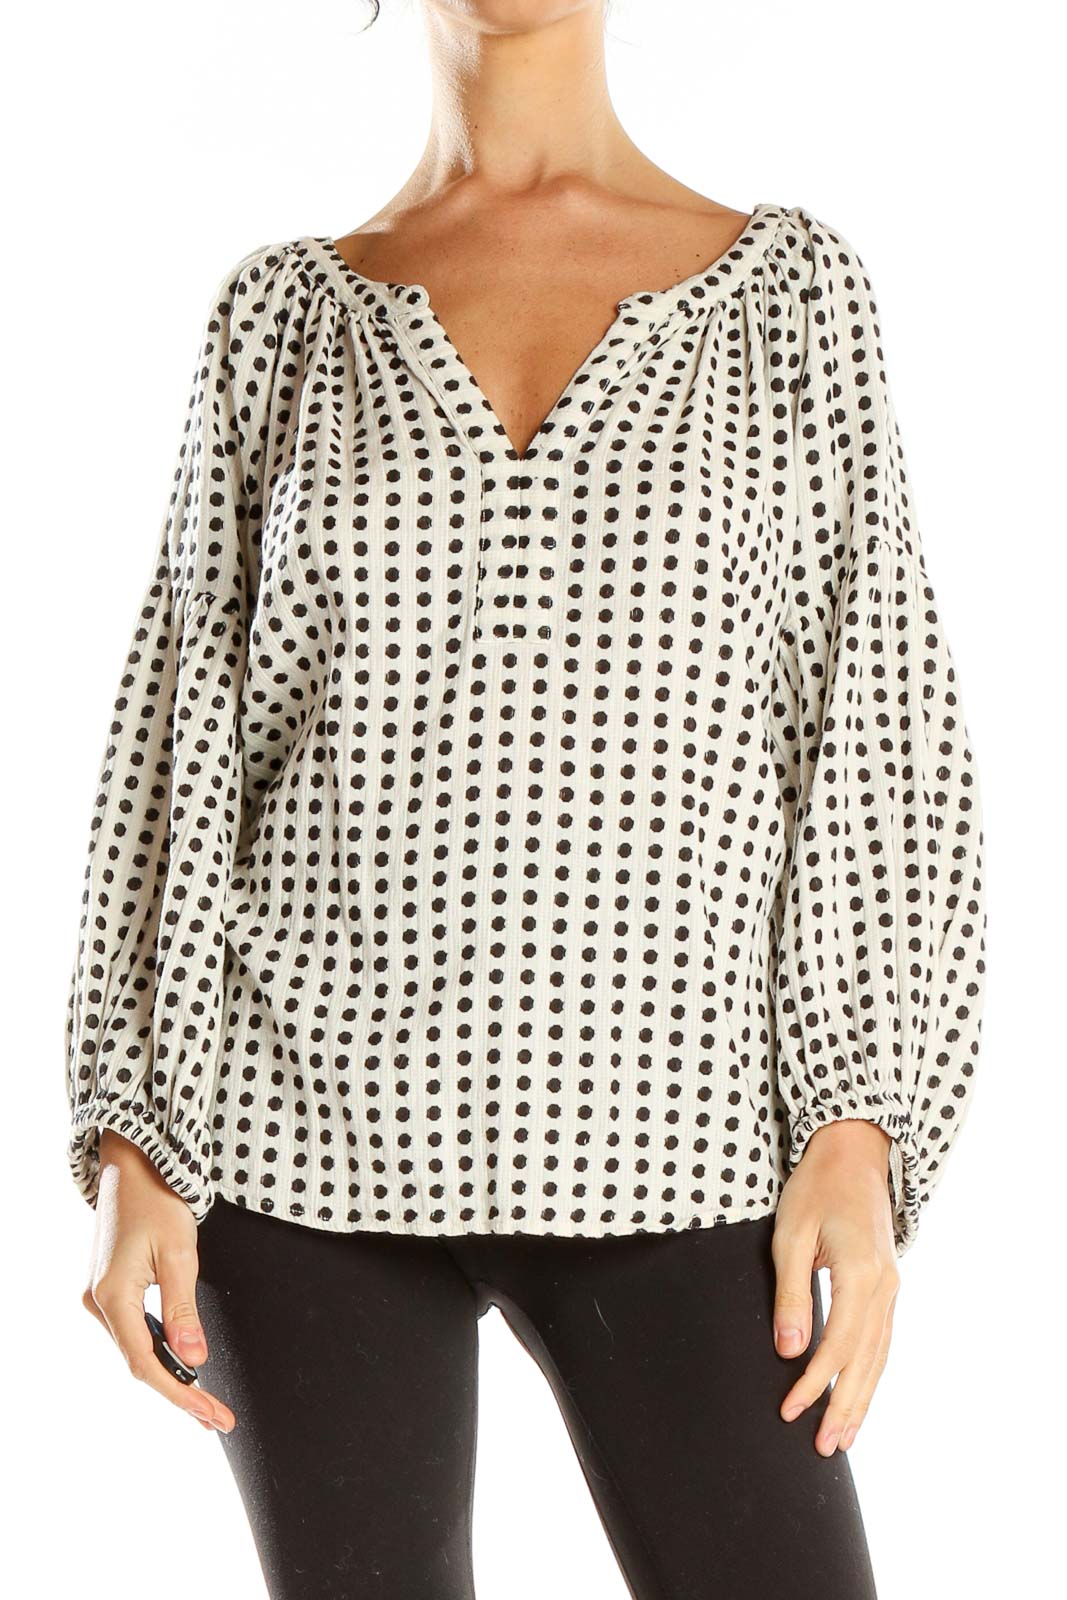 Cream Embroidered Polka Dot Blouse Front